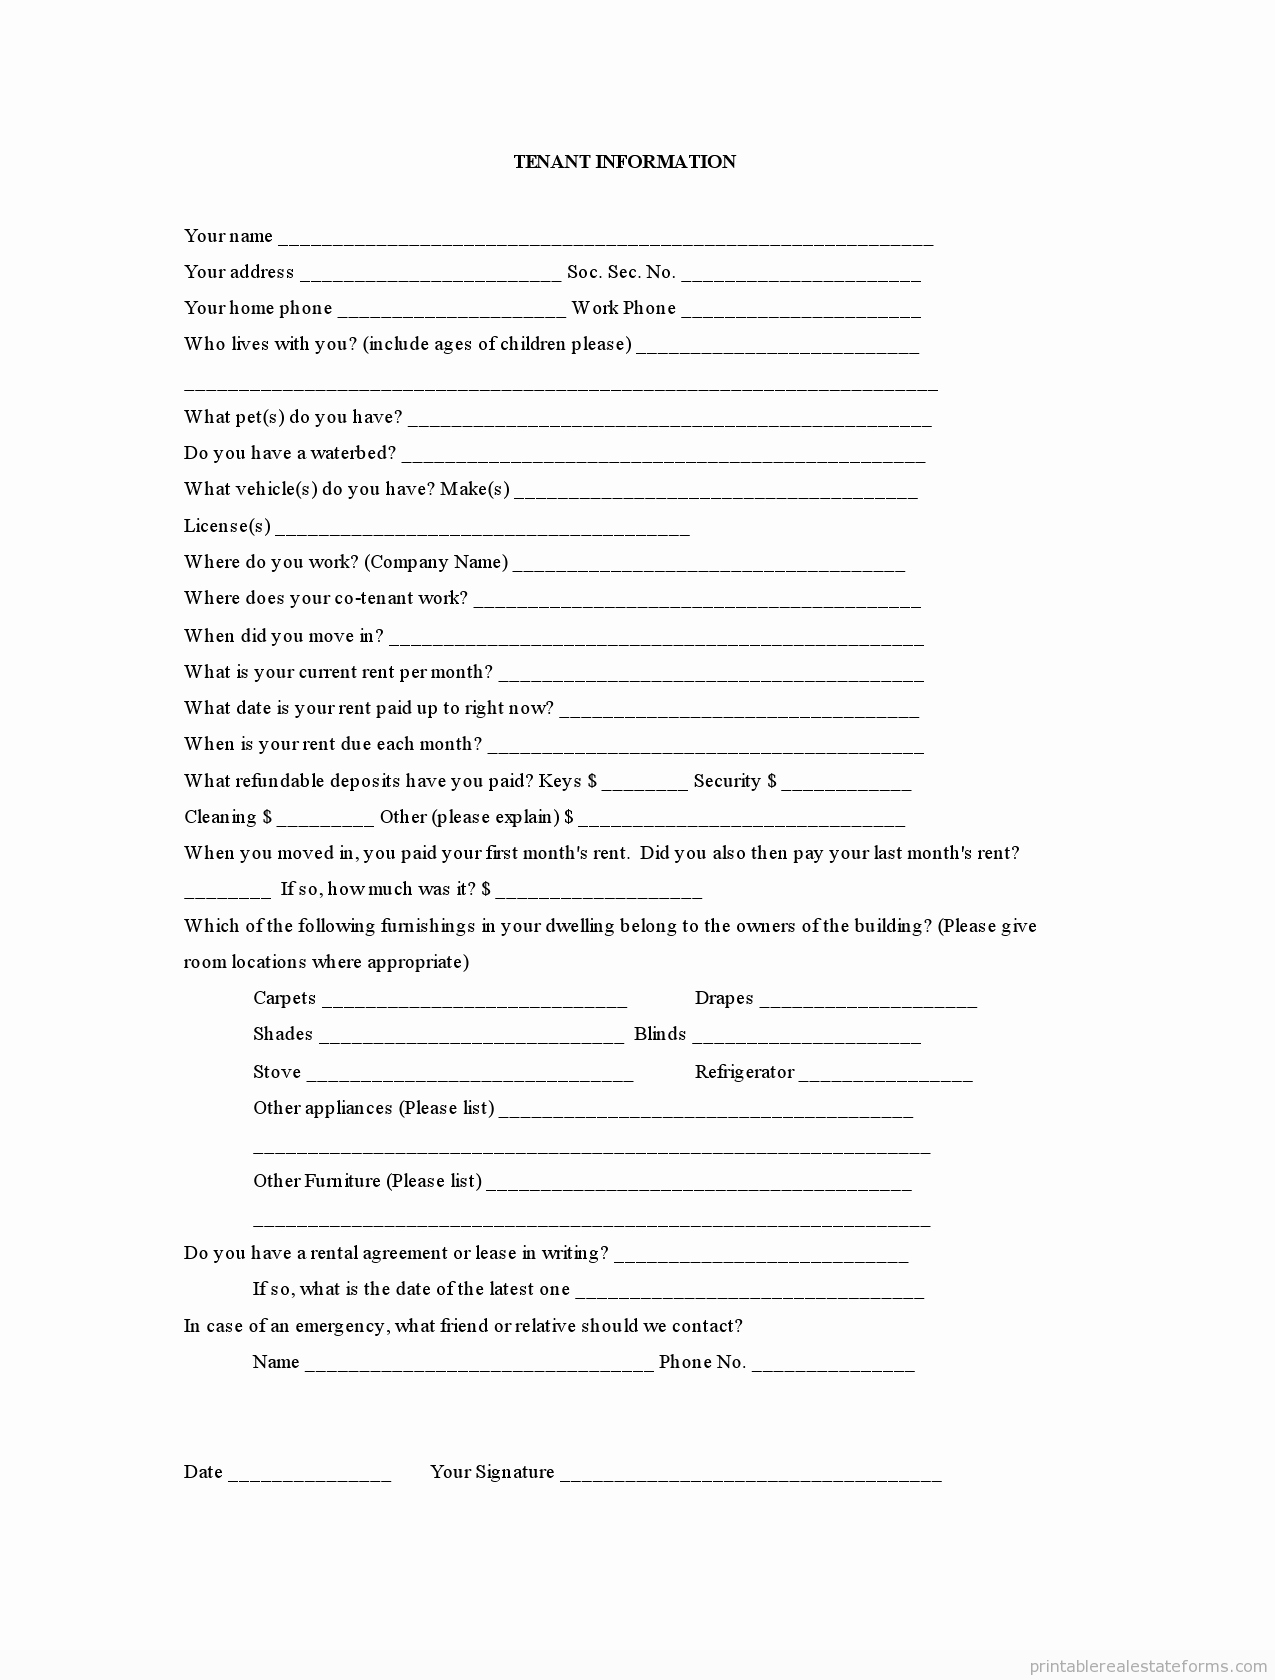 Tenant Information form Template New Printable Tenant Information Template 2015